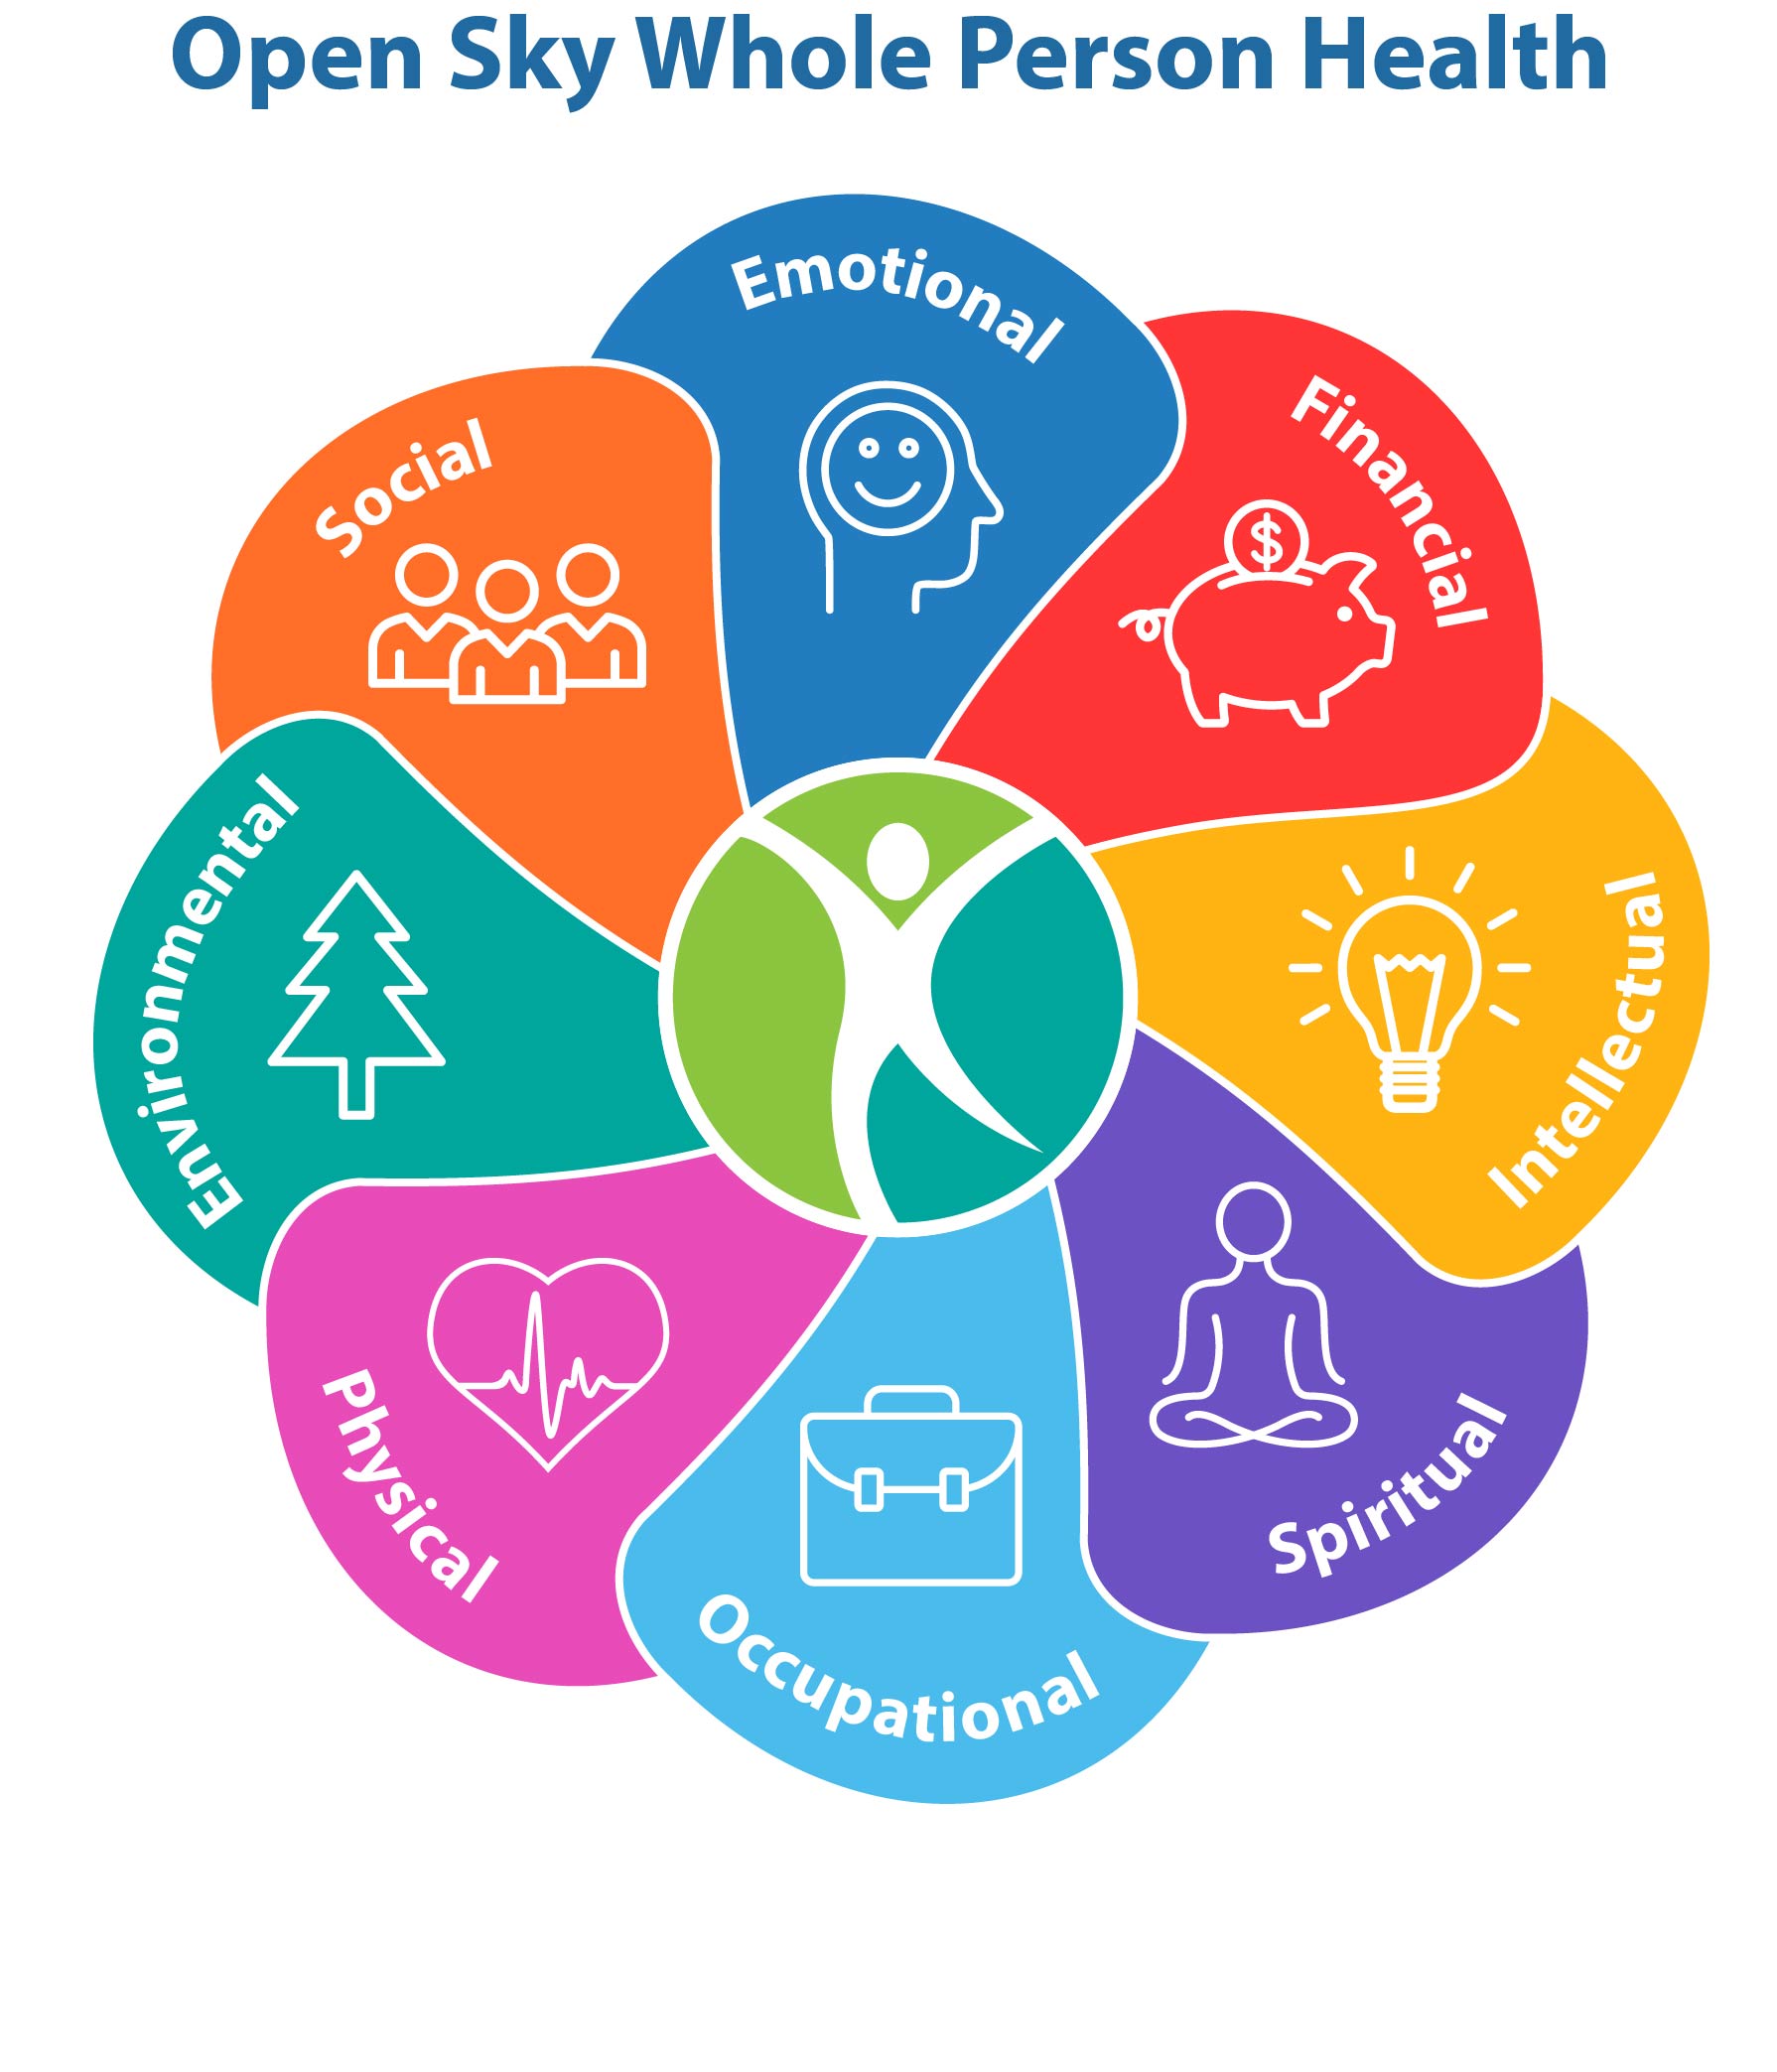 Open Sky Whole Person Health - A colorful pinwheel with a person icon in the center. Each section has text and a corresponding icon: emotional, financial, intellectual, spiritual, occupational, physical, environment, social